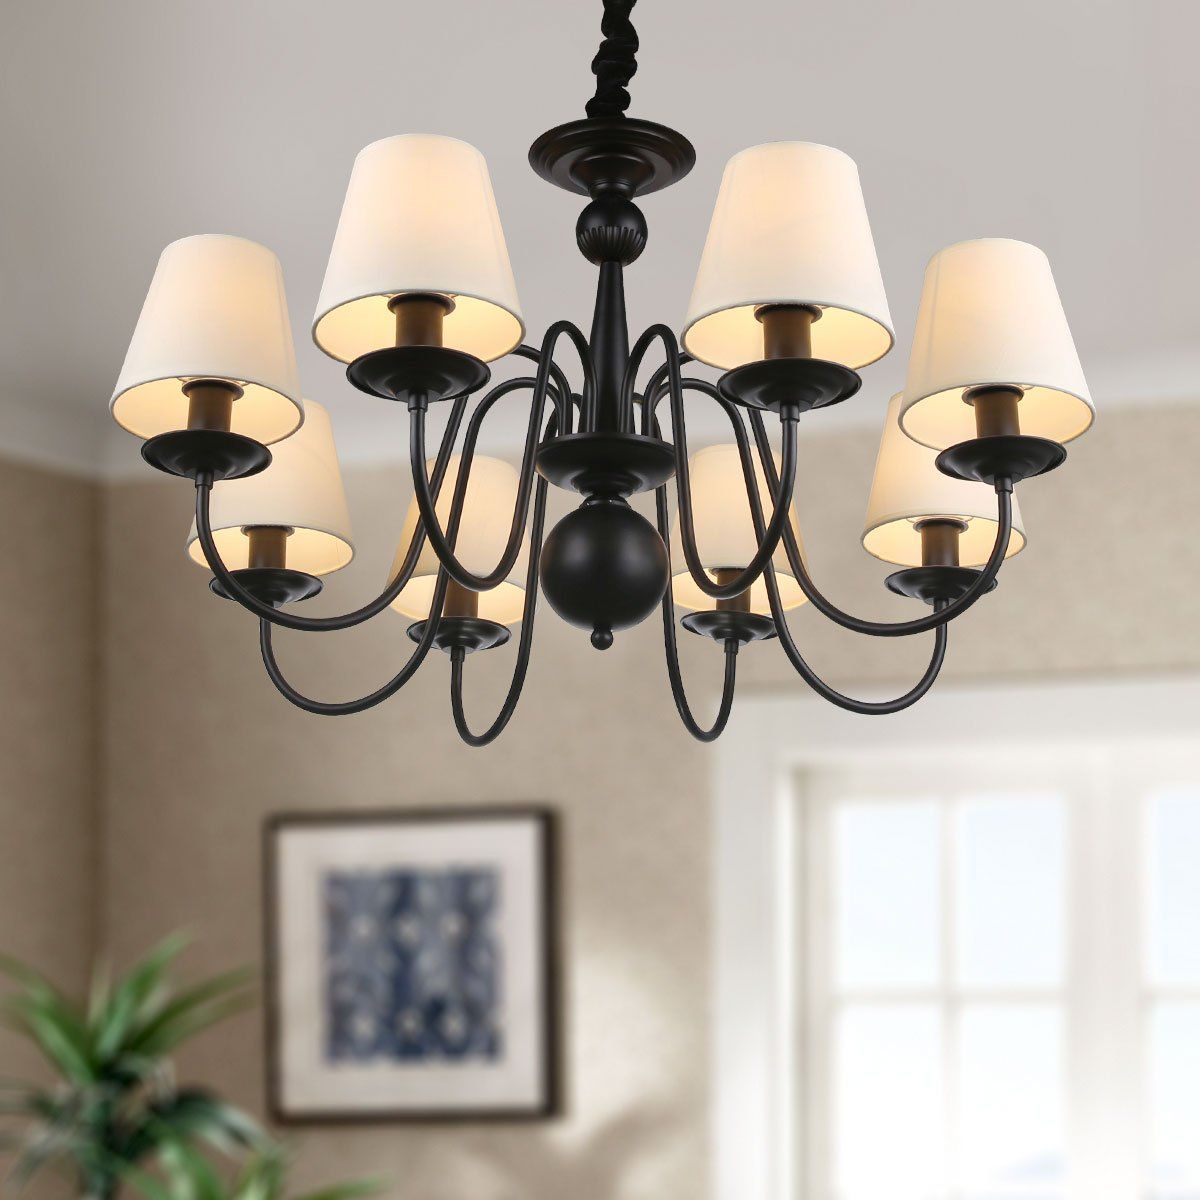 8 Light Black Wrought Iron Chandelier With Cloth Shades (E Pertaining To Black Iron Eight Light Minimalist Chandeliers (View 12 of 15)